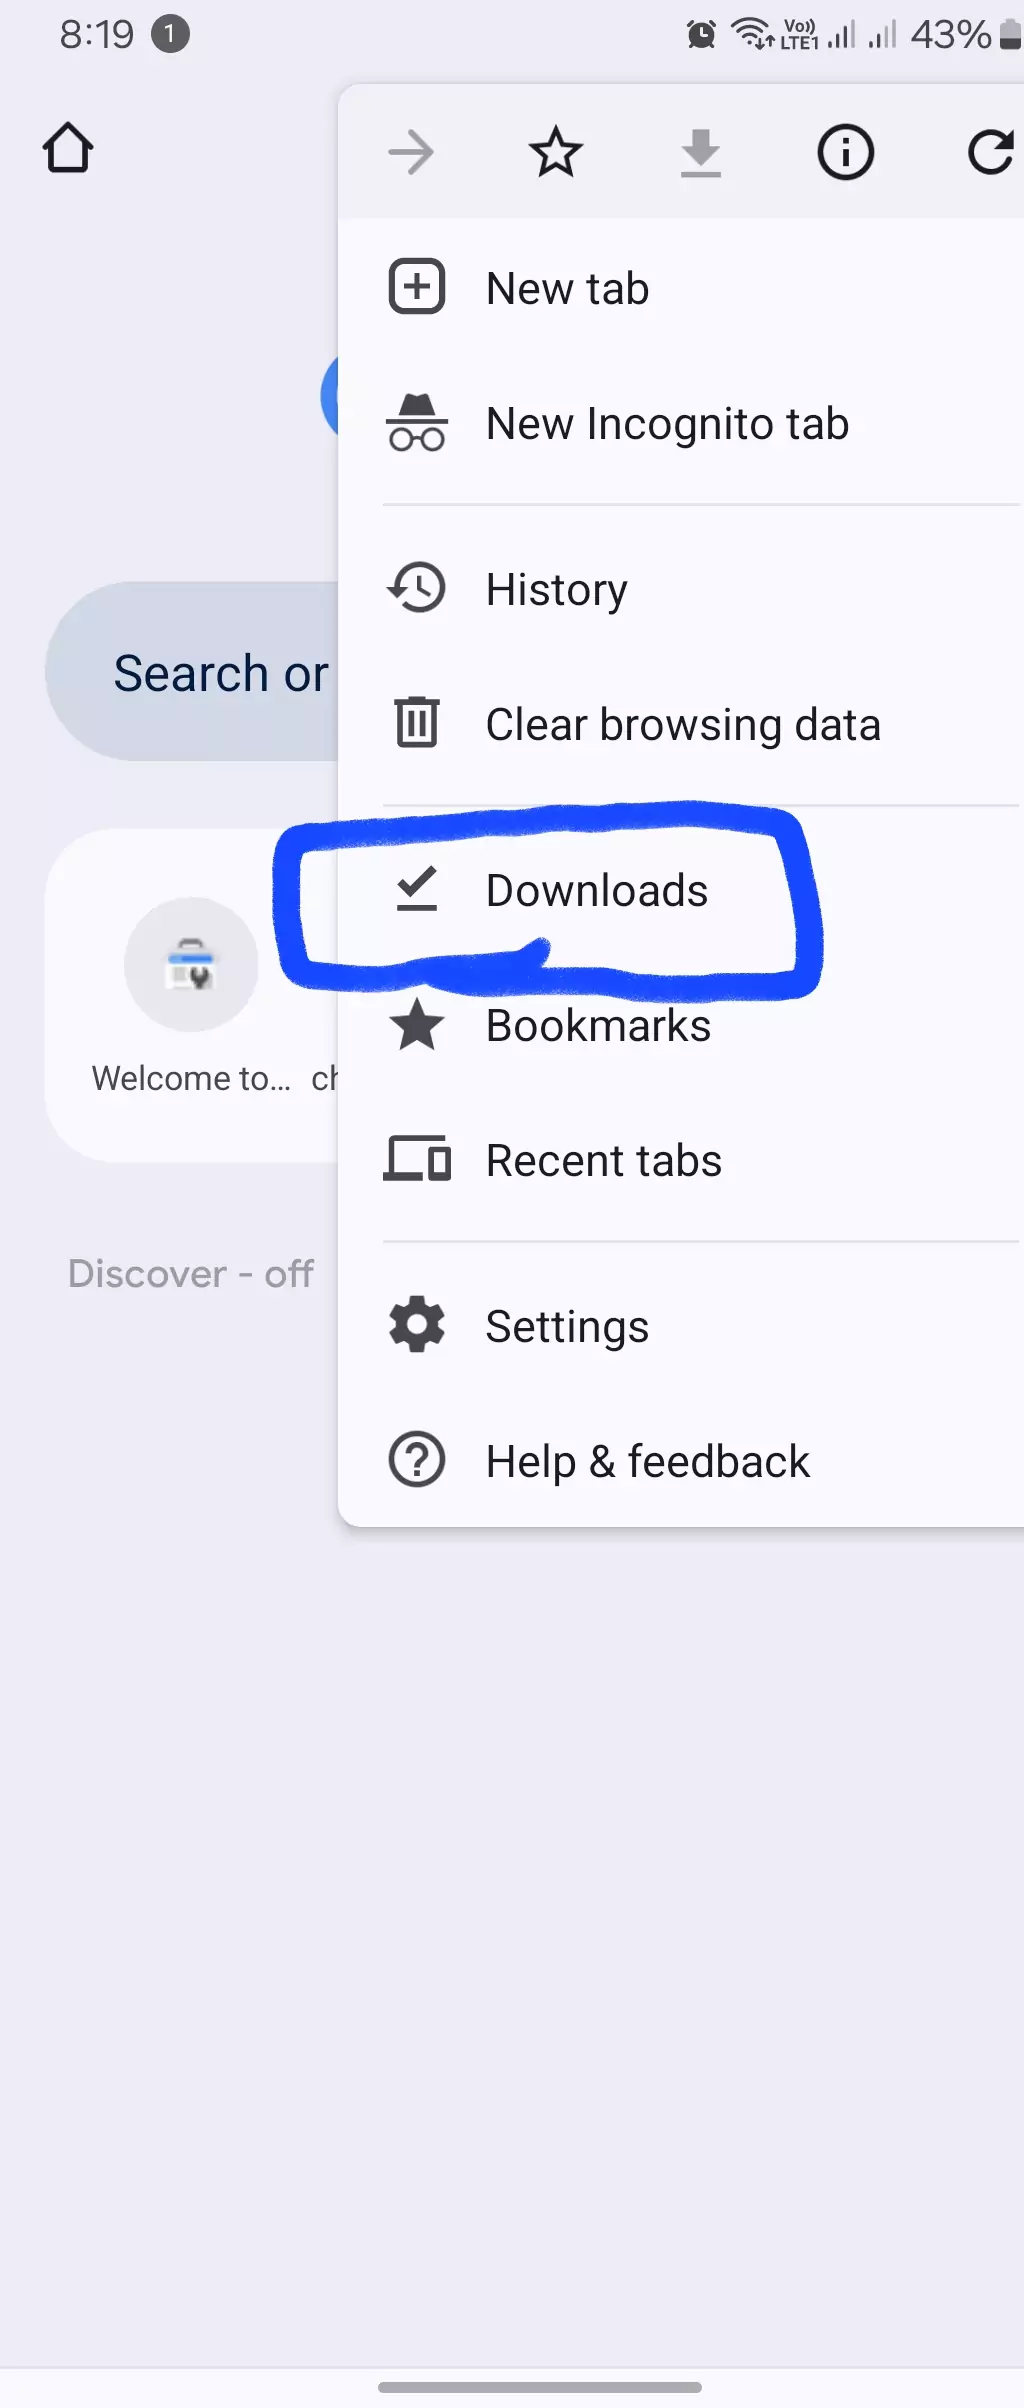 chrome app download section highlighted screenshot